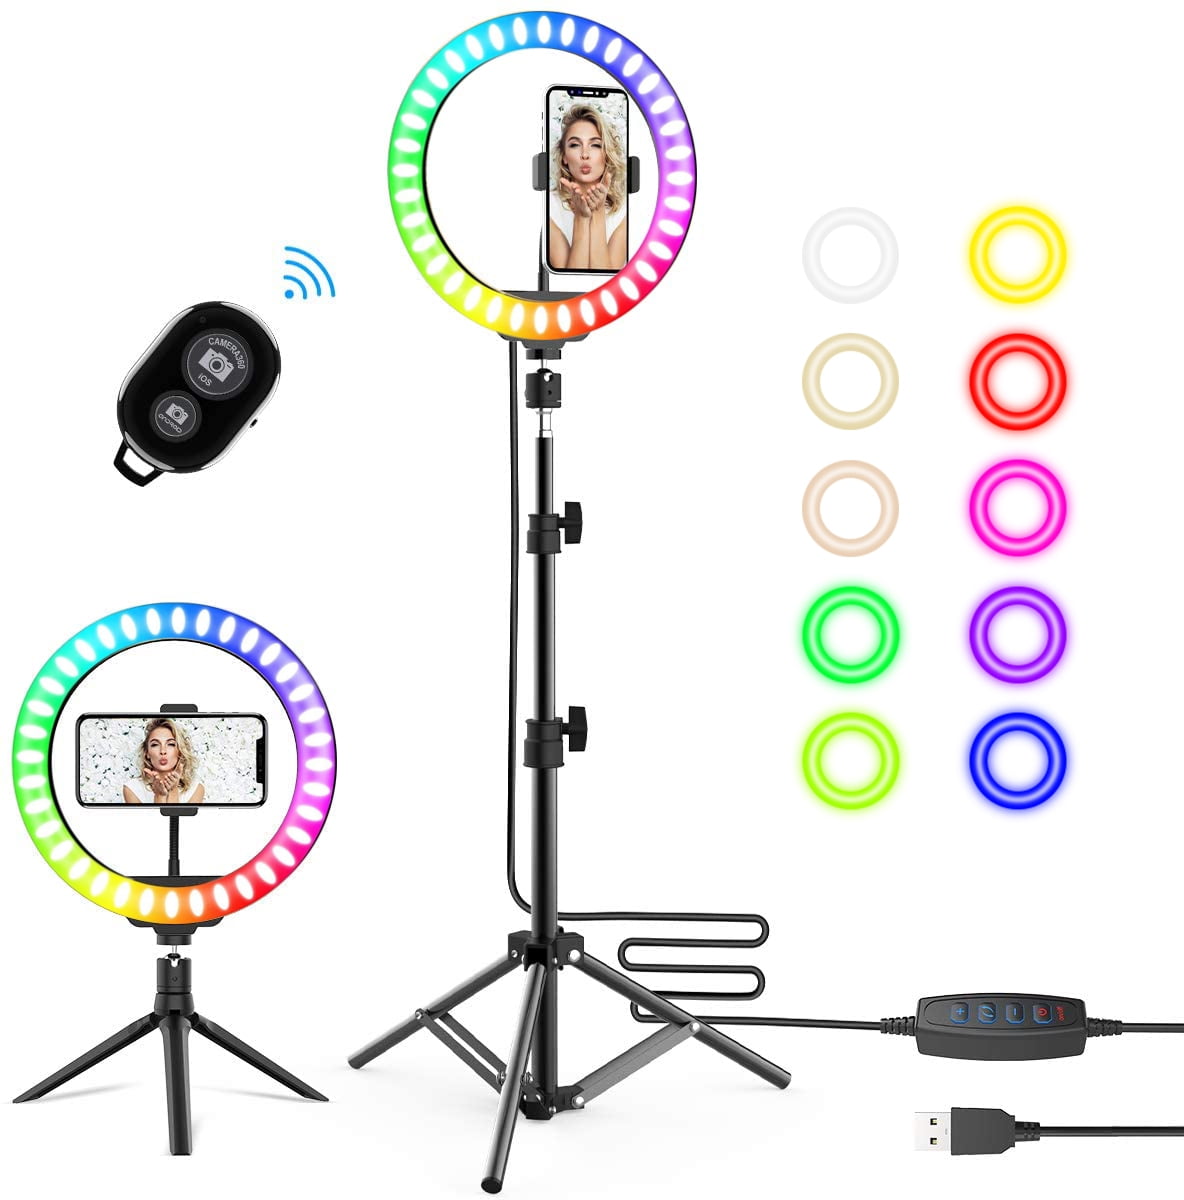 KEYUTE 10 Selfie Ring Light Desktop Beauty Make up Ring Light with Mirror for YouTube Video Live Steaming Dimmable RGB LED Ring Light with Tripod Stand and Cell Phone Holder for Vlog